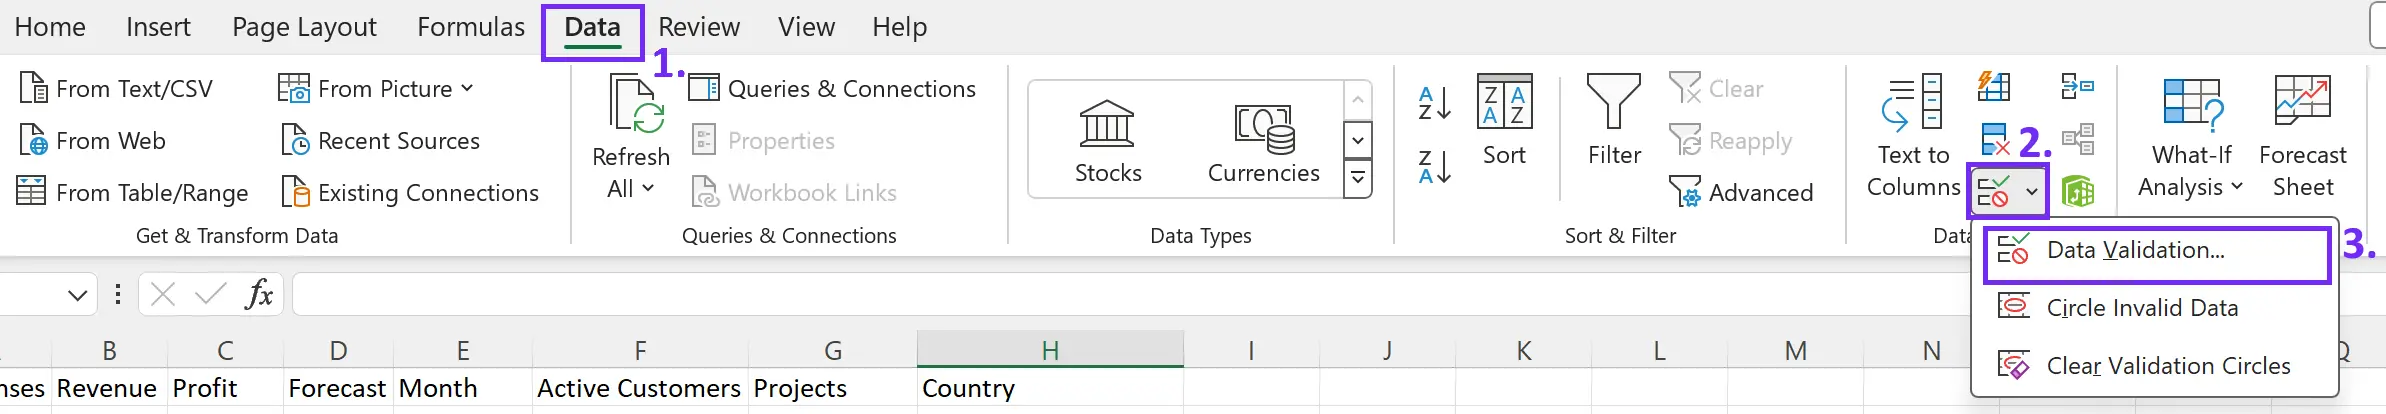 Data validation step 1 in Excel settings